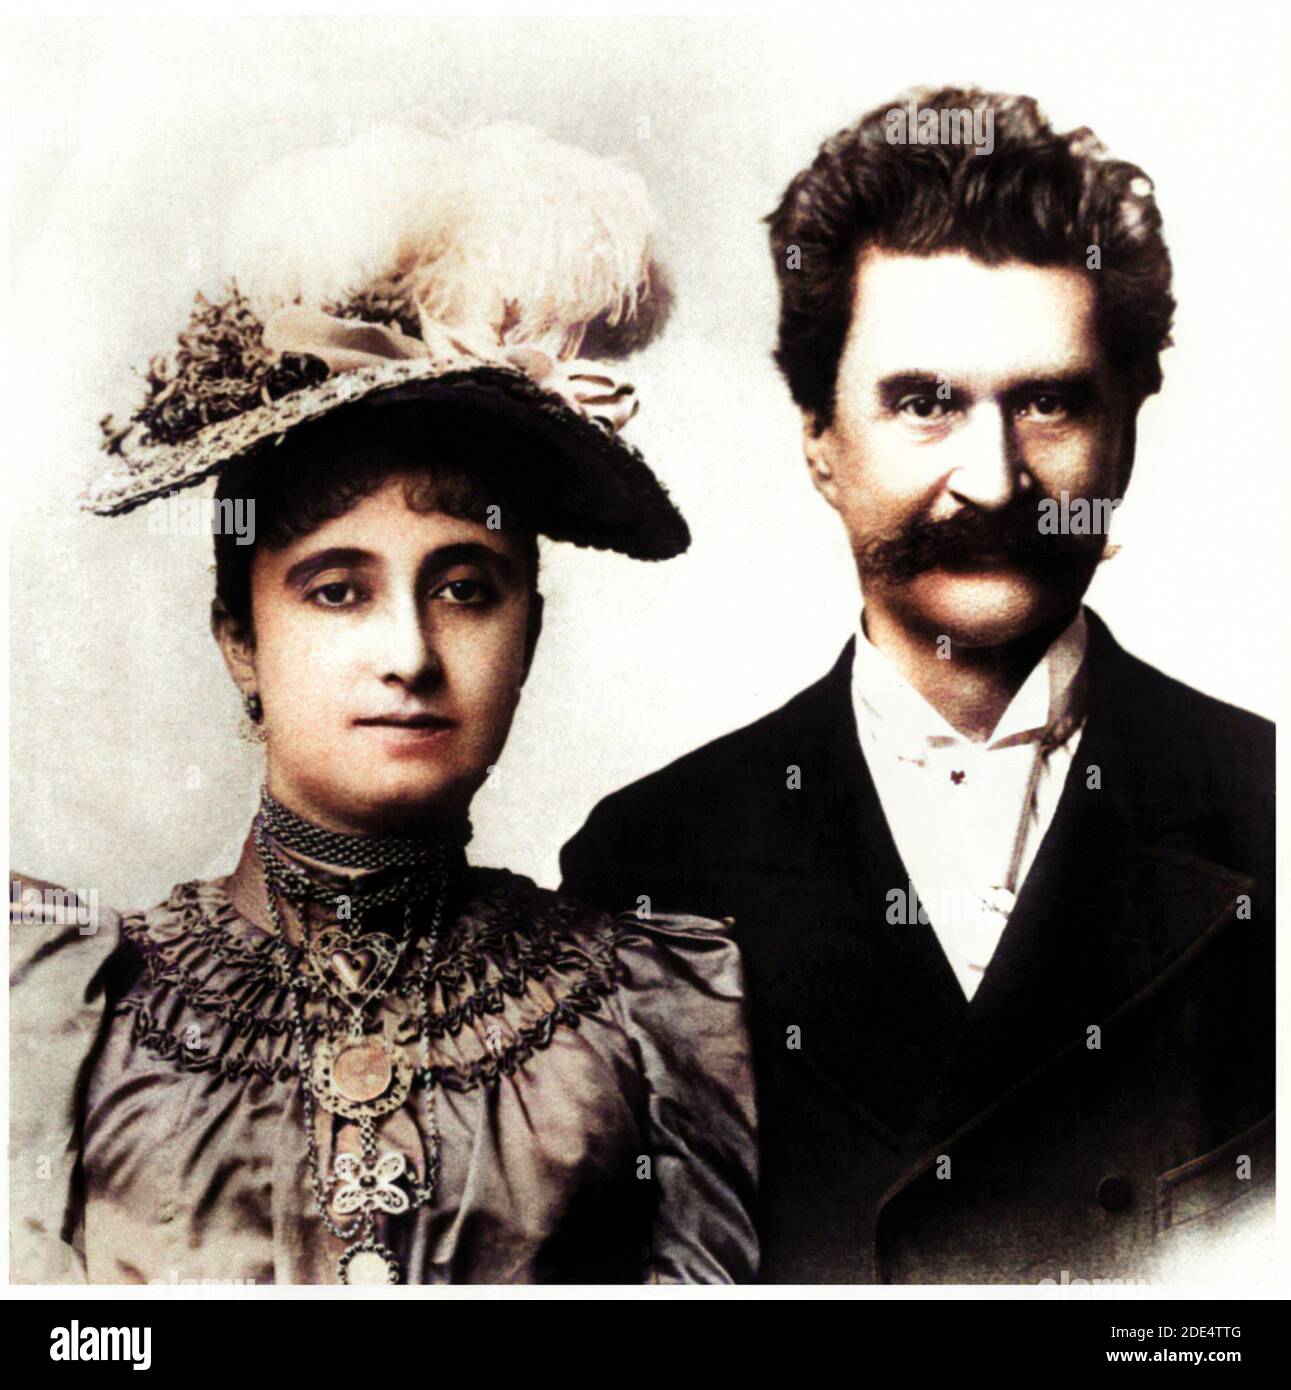 1887 ca, AUSTRIA : The austrian music composer JOHANN STRAUSS Jr ( 1825 - 1899 ) with his 3th wife ADELE DEUTSCH ( 1856 - 1930 ) married in august 1887 . Dubbed ' The Waltz King ', popular composer of dance music and Operettas , of wich the most famous is DIE FLEDERMAUS . Unknown photographer .Unknown photographer . DIGITALLY COLORIZED . - ADELE - COMPOSITORE - OPERETTA - WALTZER - VALZER - WALZER - CLASSICA - CLASSICAL - PORTRAIT - RITRATTO - MUSICISTA - MUSICA - moustache - baffi  - CRAVATTA - TIE - Junior  - -- ARCHIVIO GBB Stock Photo